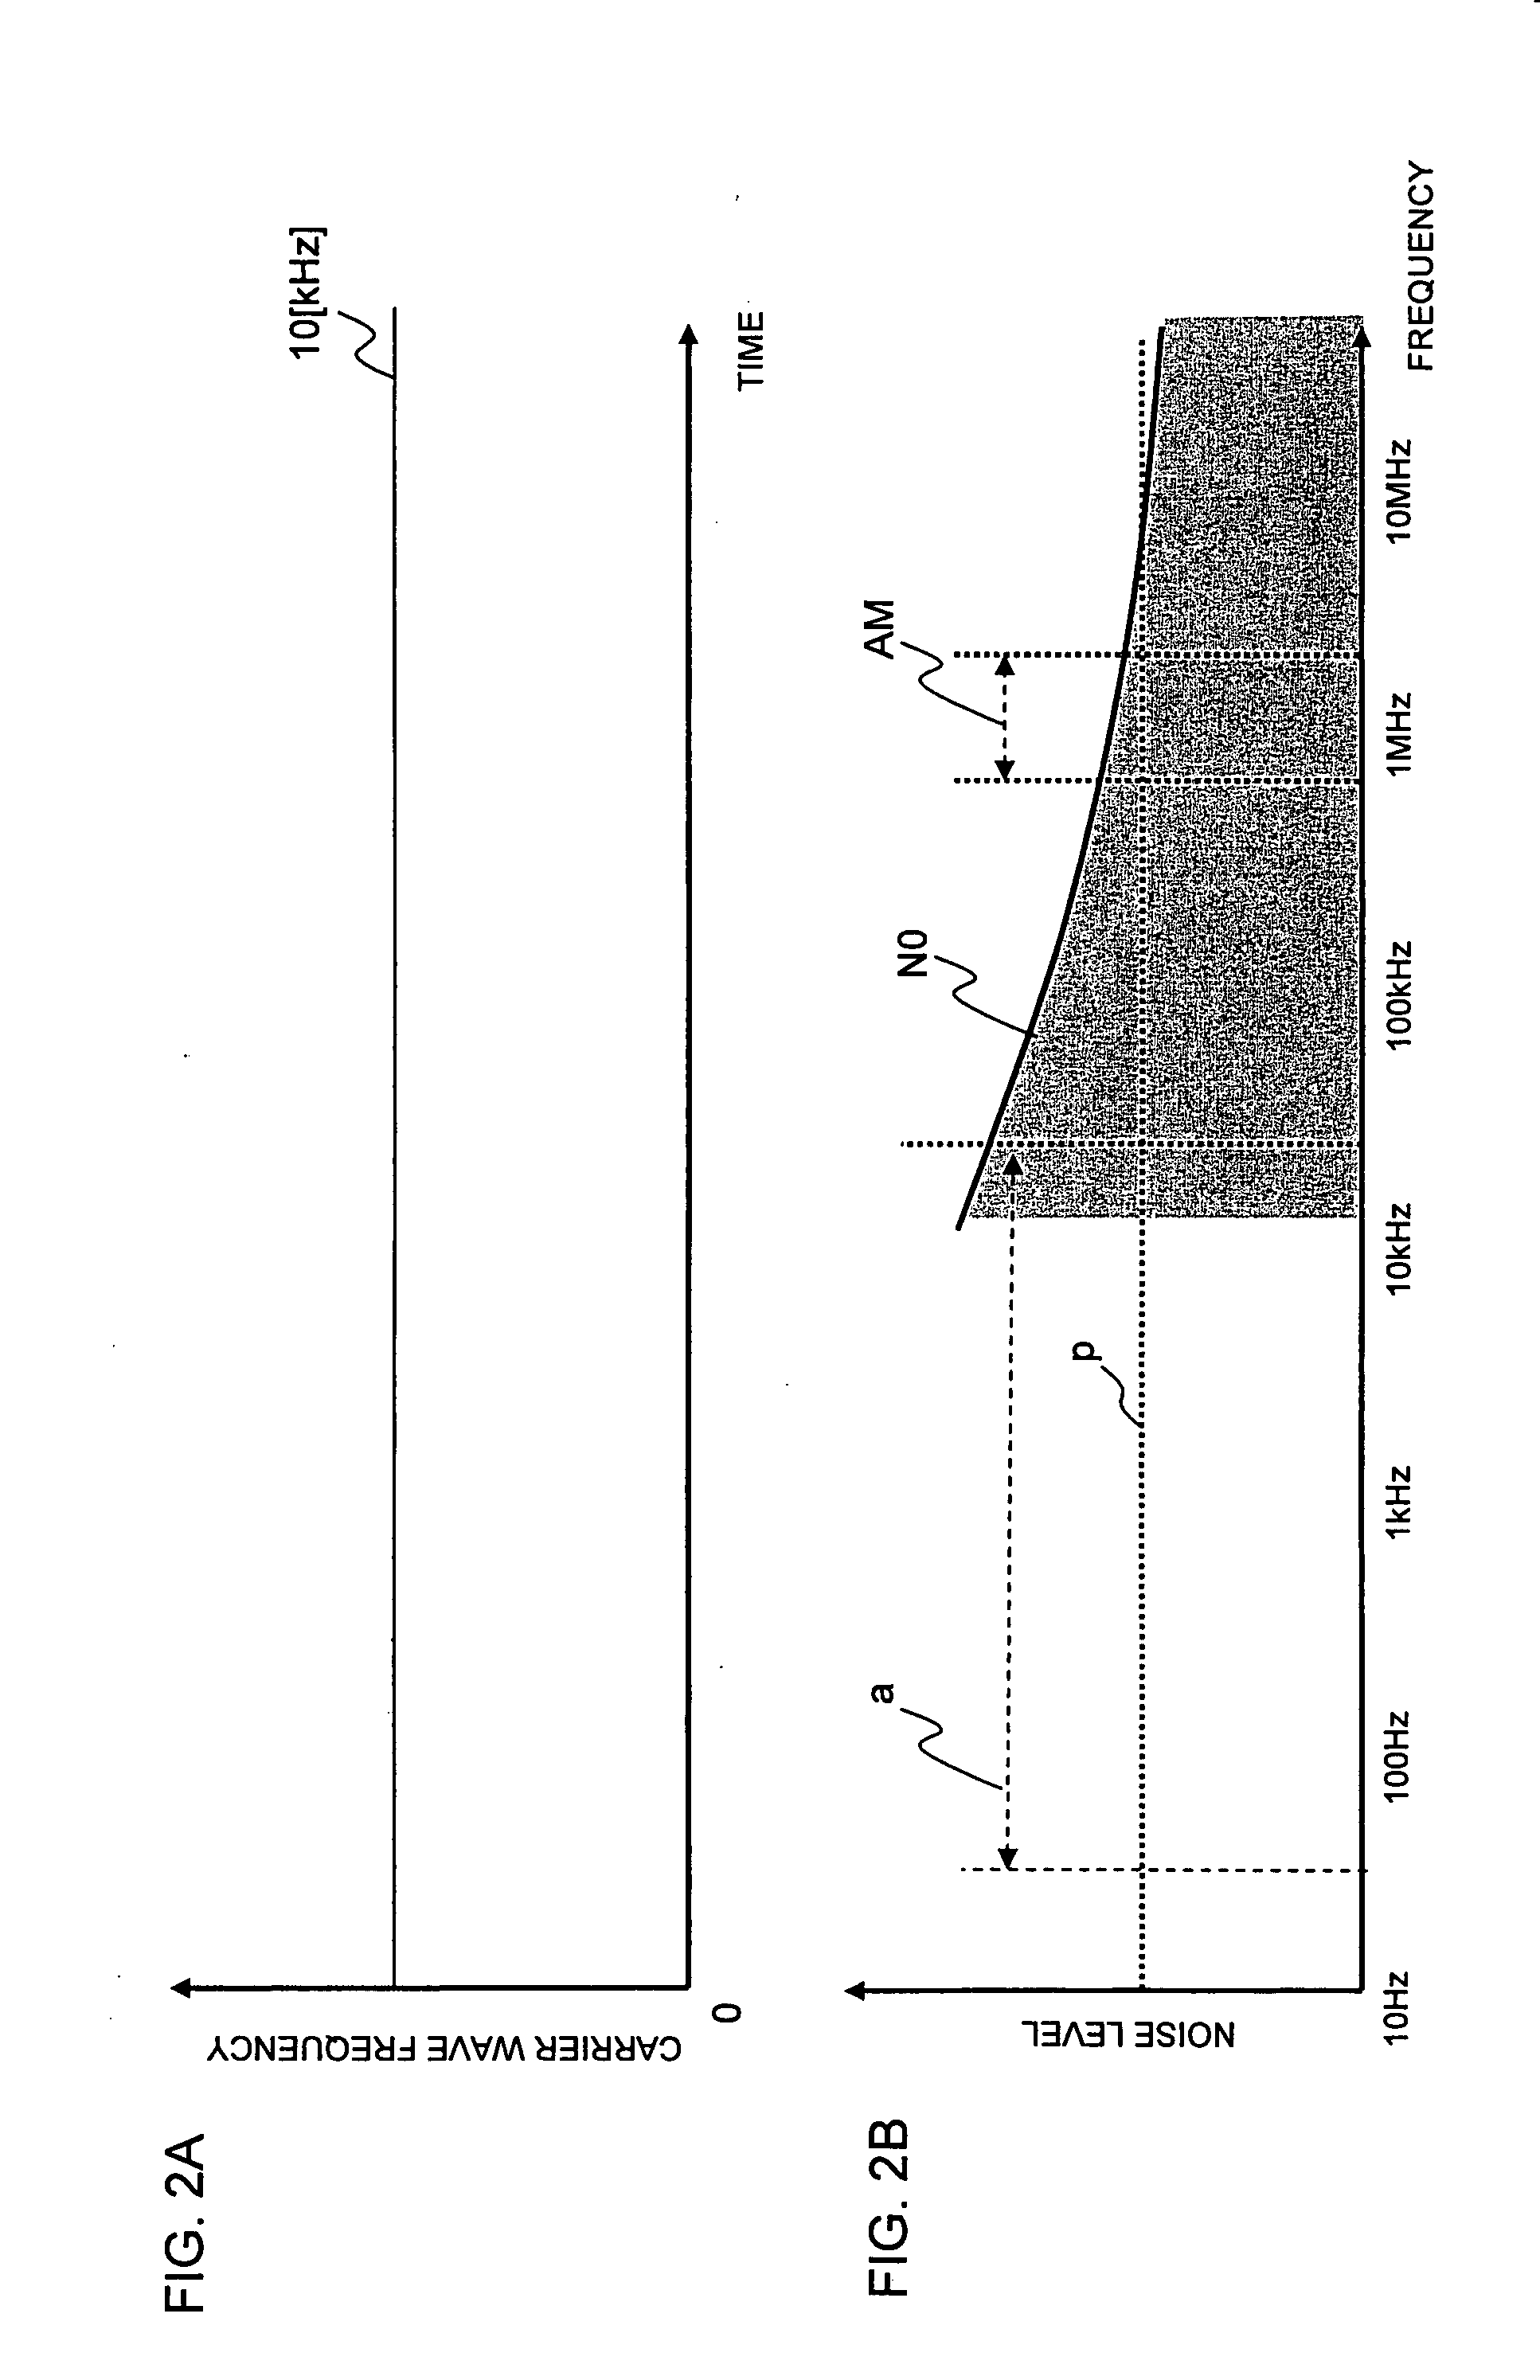 Power control apparatus and method